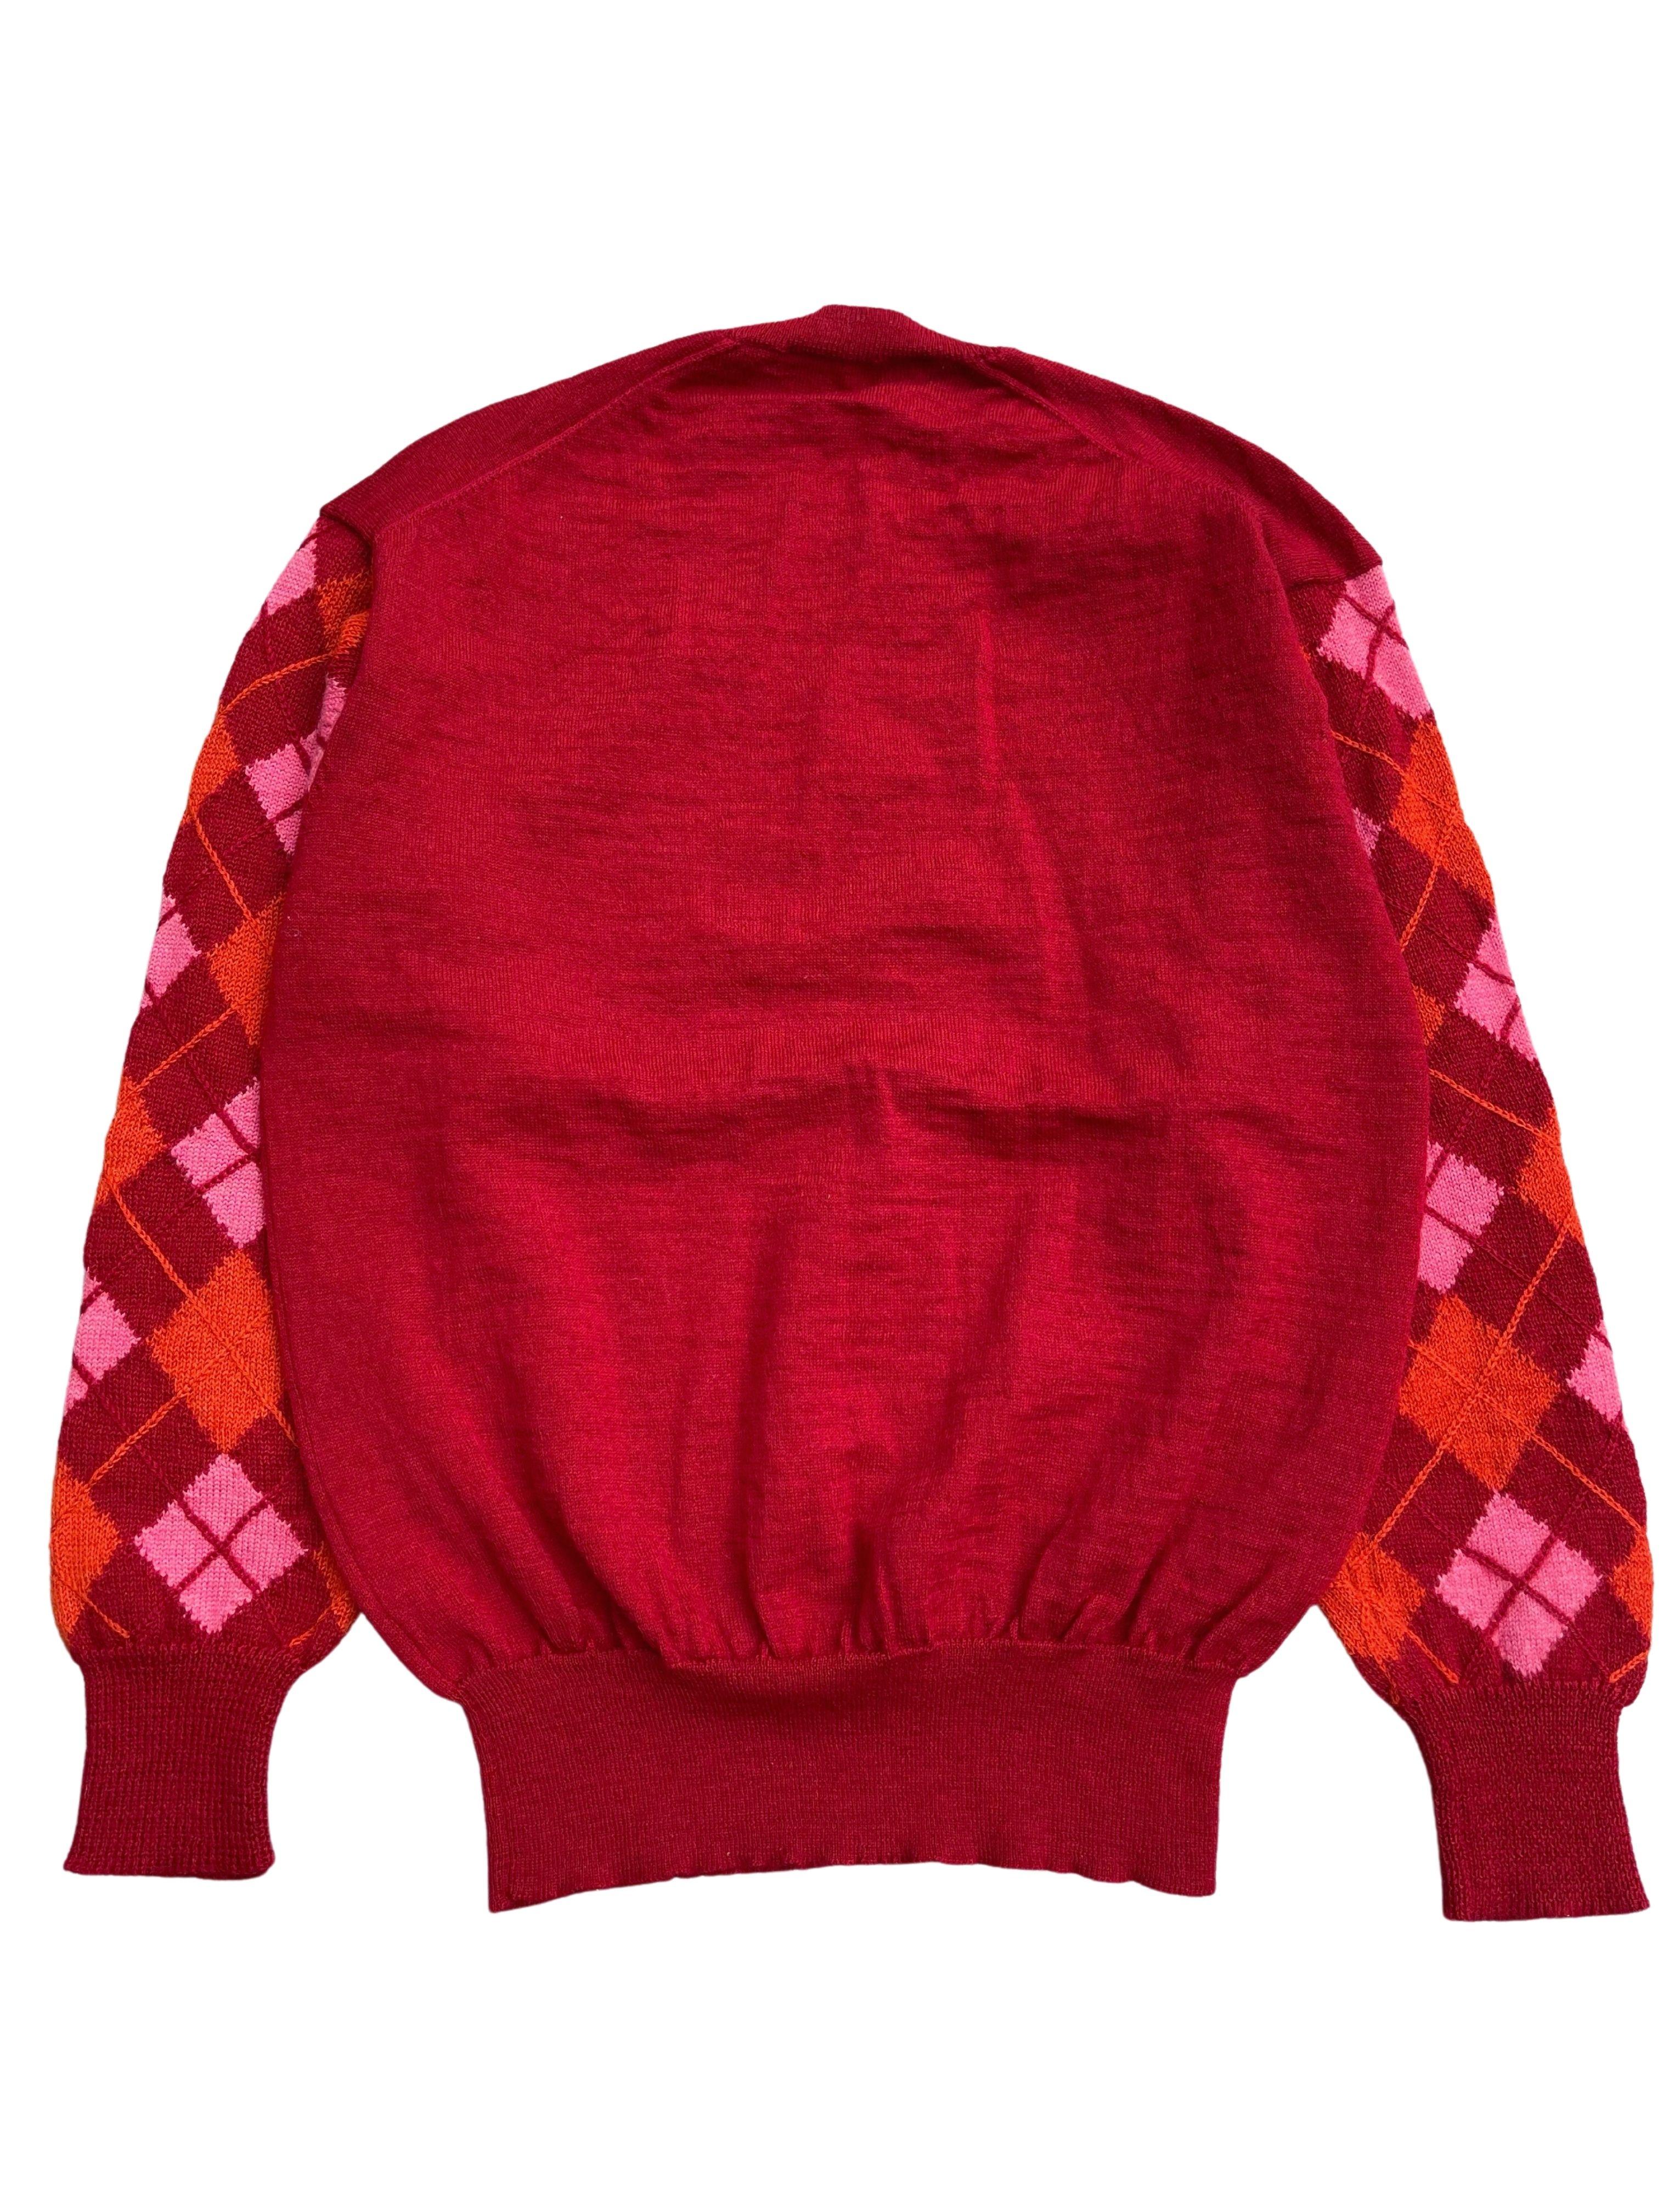 Red Comme des Garcons Homme Argyle Sleeve Sweater, Autumn Winter 2000 For Sale